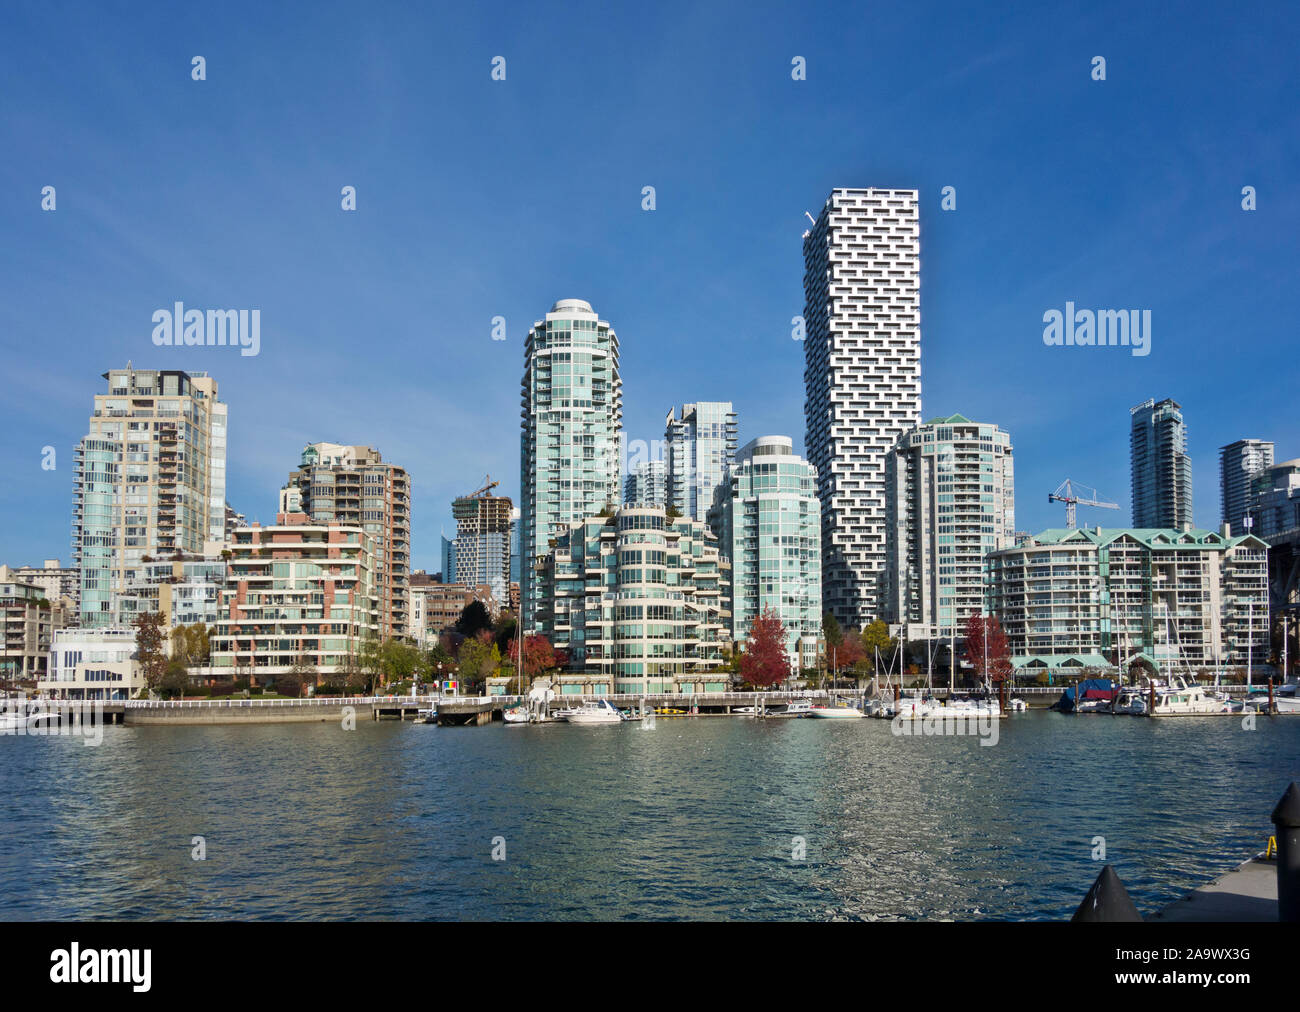 Highrise apartment buildings on the False Creek, Vancouver, British Columbia, Canada. Vancouver housing on the waterfront. Stock Photo